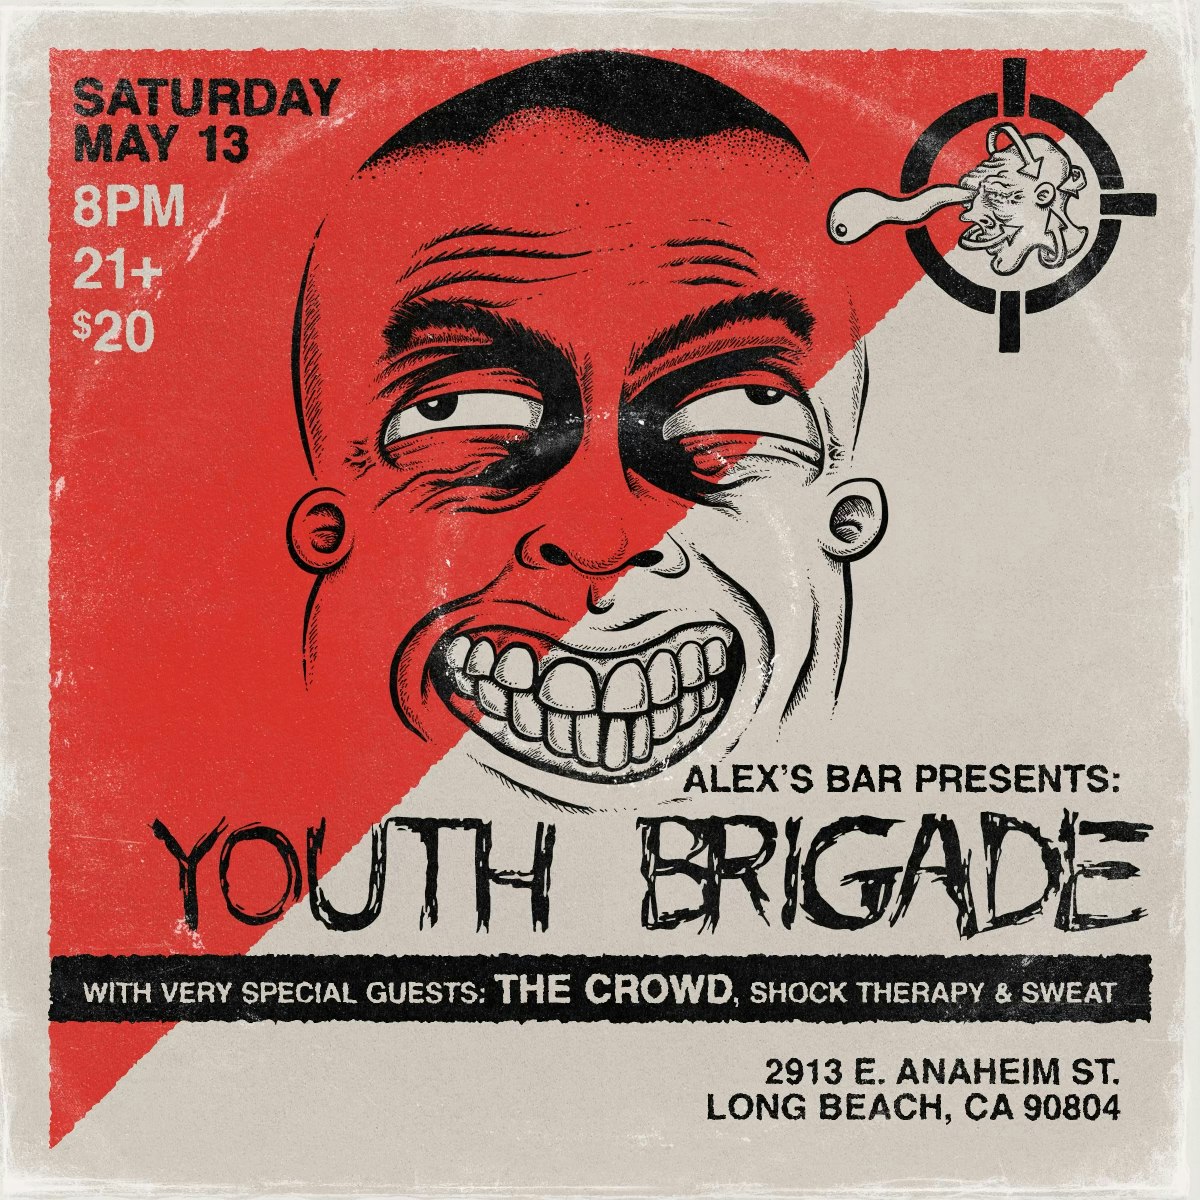 Youth Brigade + The Crowd + Shock Therapy + Sweat